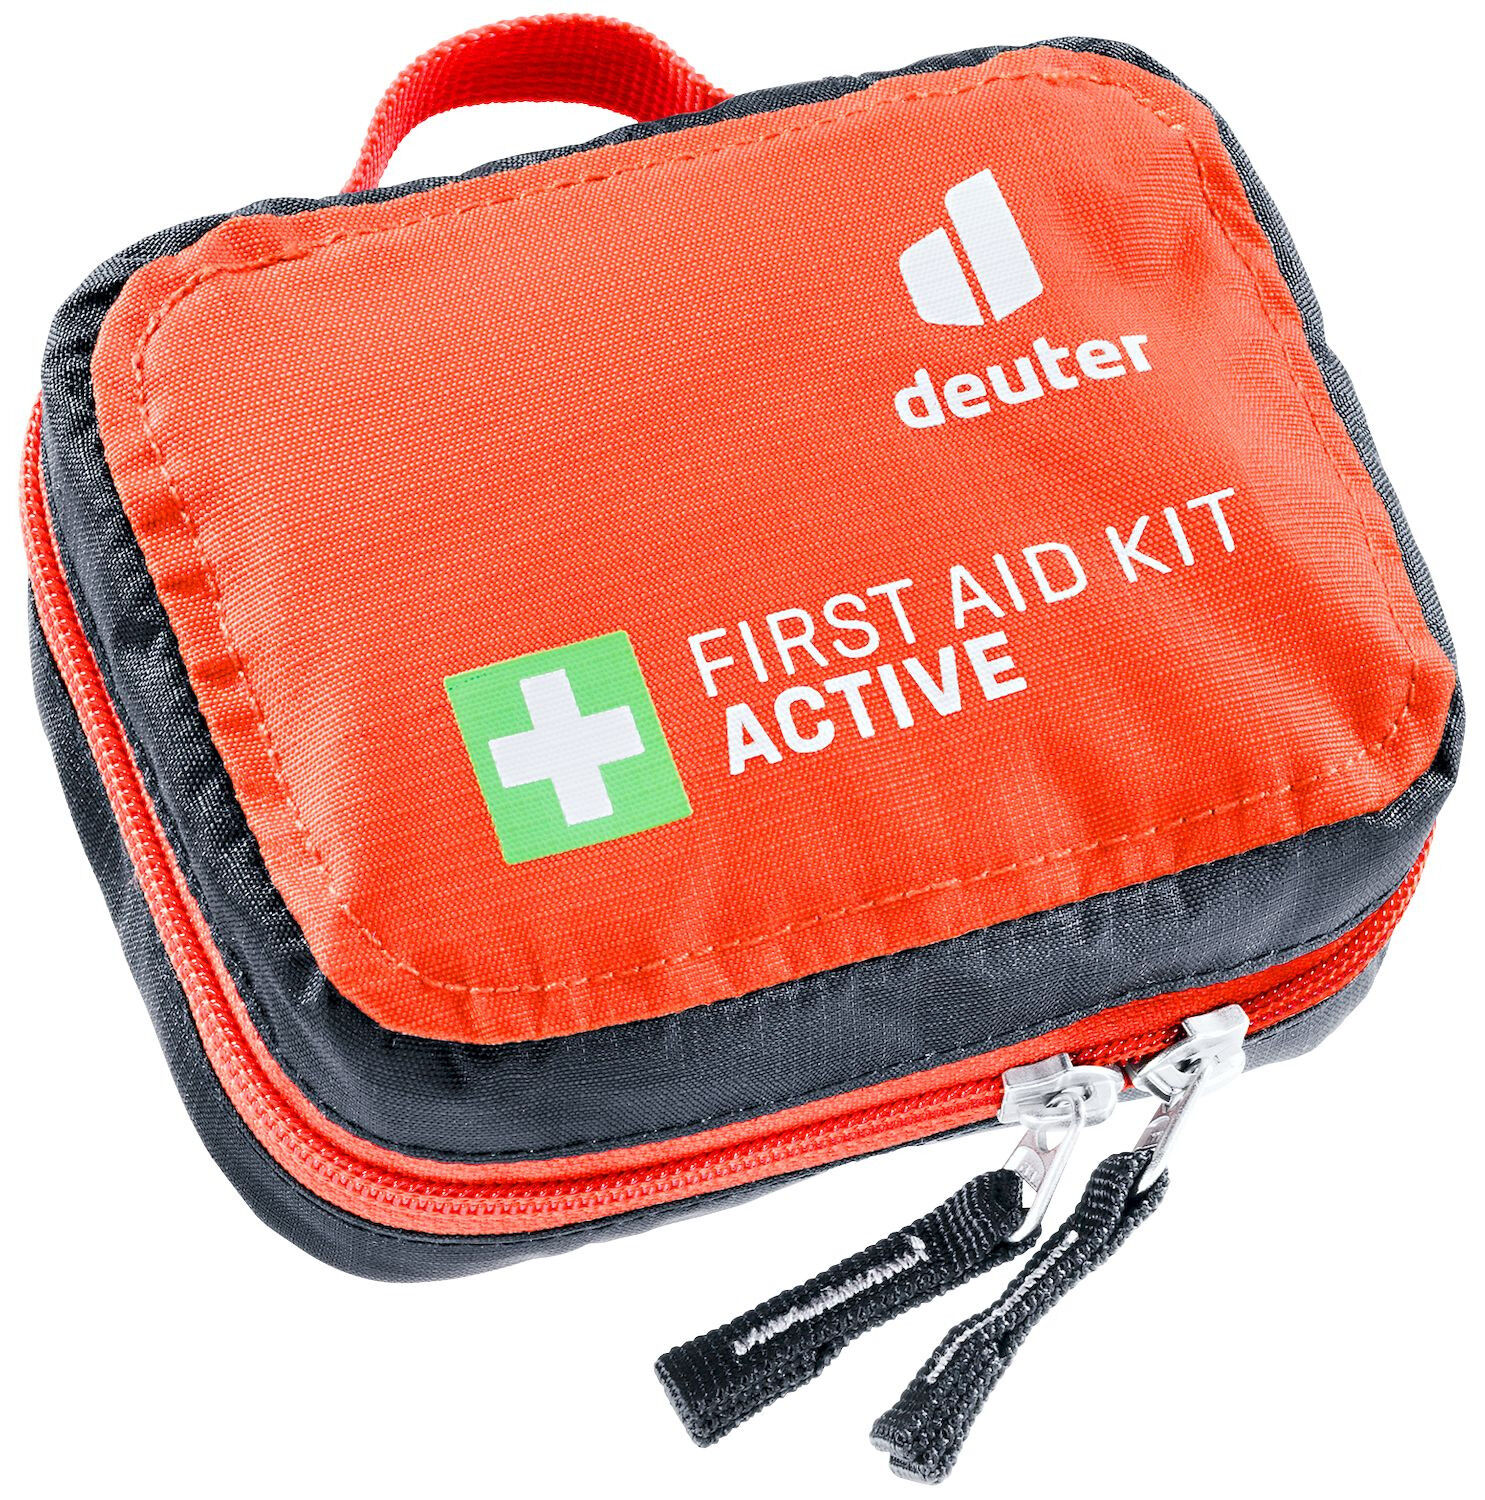 Deuter First Aid Kit Active - First aid kit